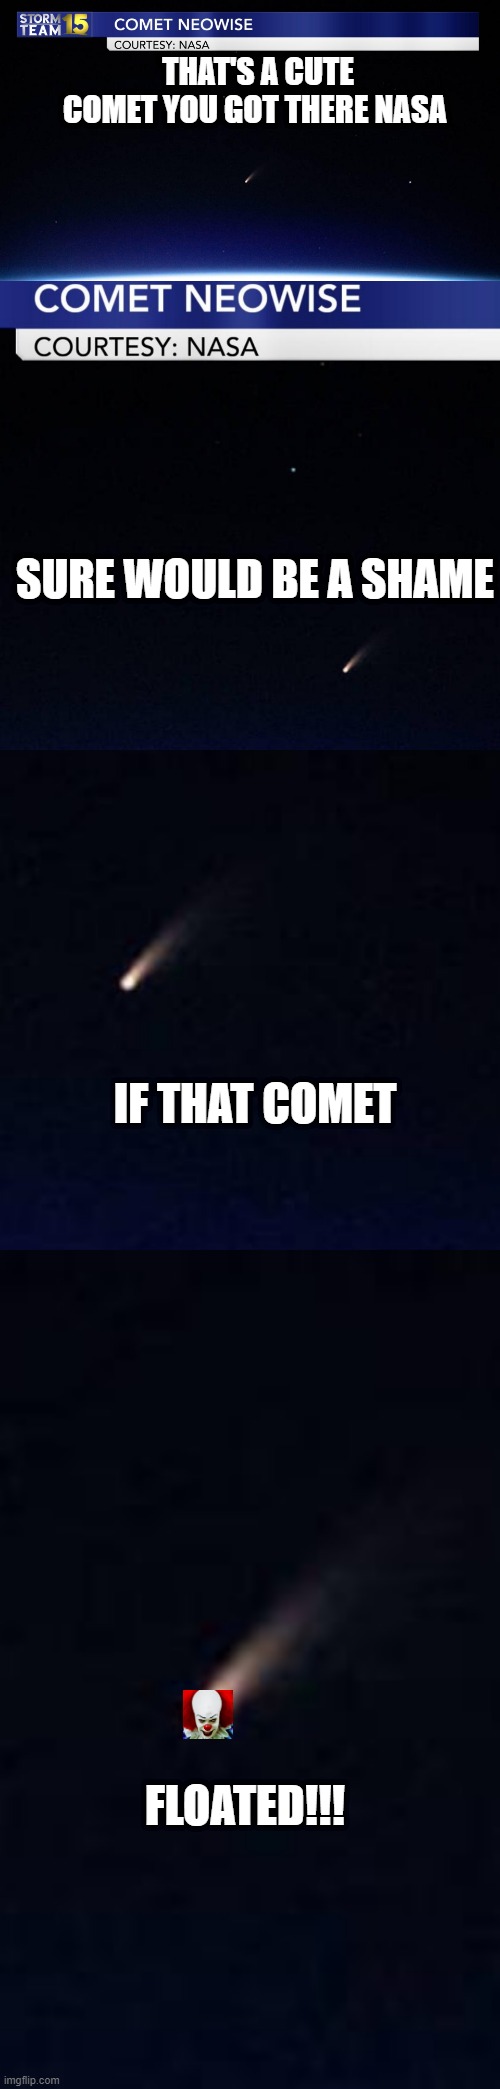 Neowise Huh? |  THAT'S A CUTE COMET YOU GOT THERE NASA; SURE WOULD BE A SHAME; IF THAT COMET; FLOATED!!! | image tagged in comet,pennywise the dancing clown | made w/ Imgflip meme maker